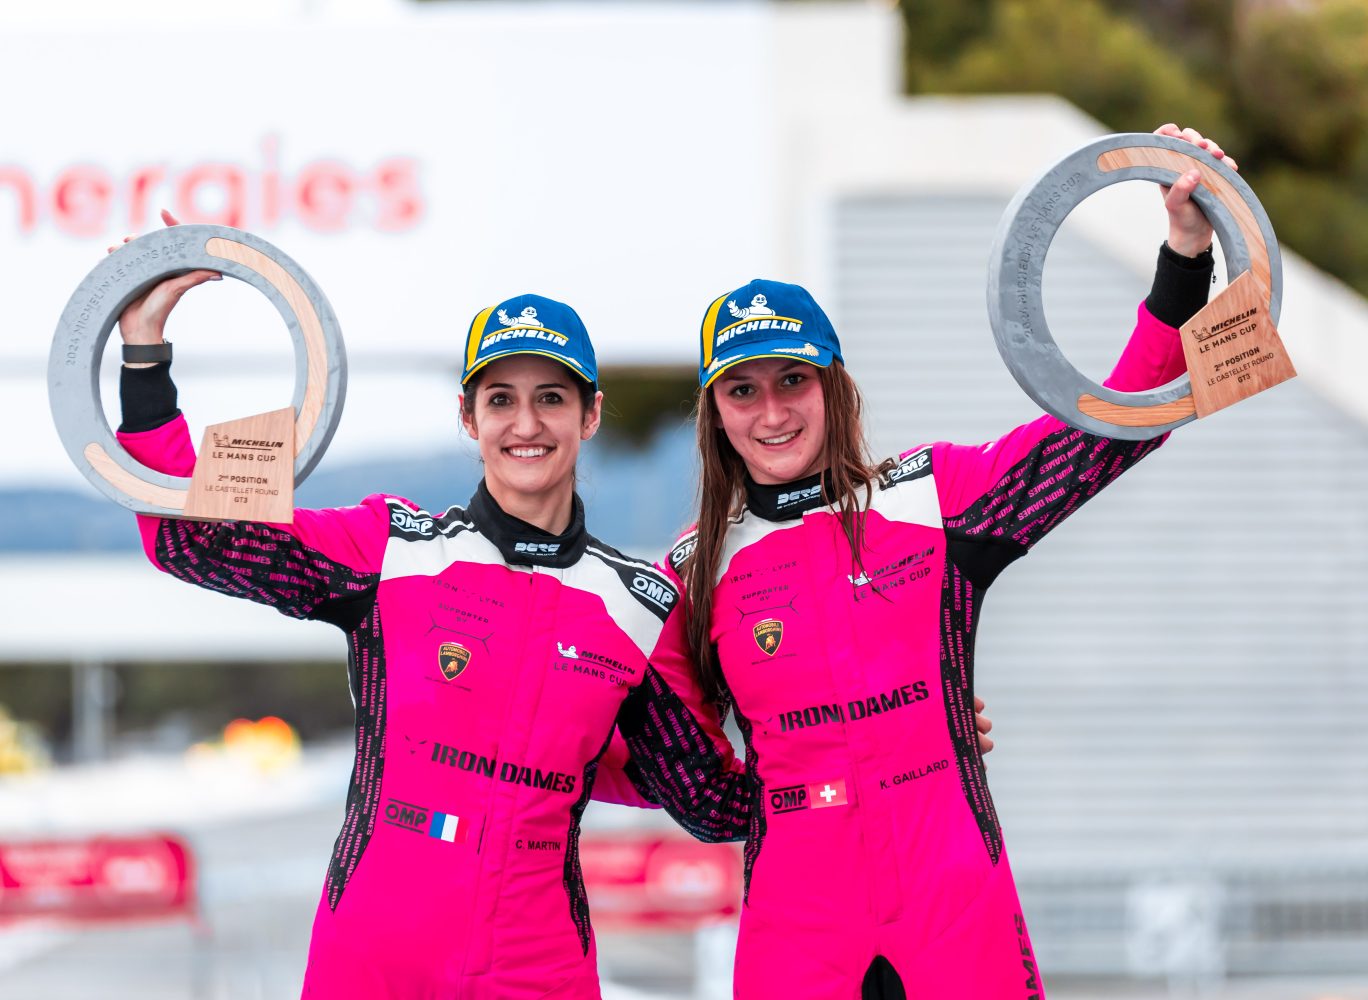 IRON DAMES MAKE STRONG IMPRESSION ACROSS MULTIPLE RACING FRONTS